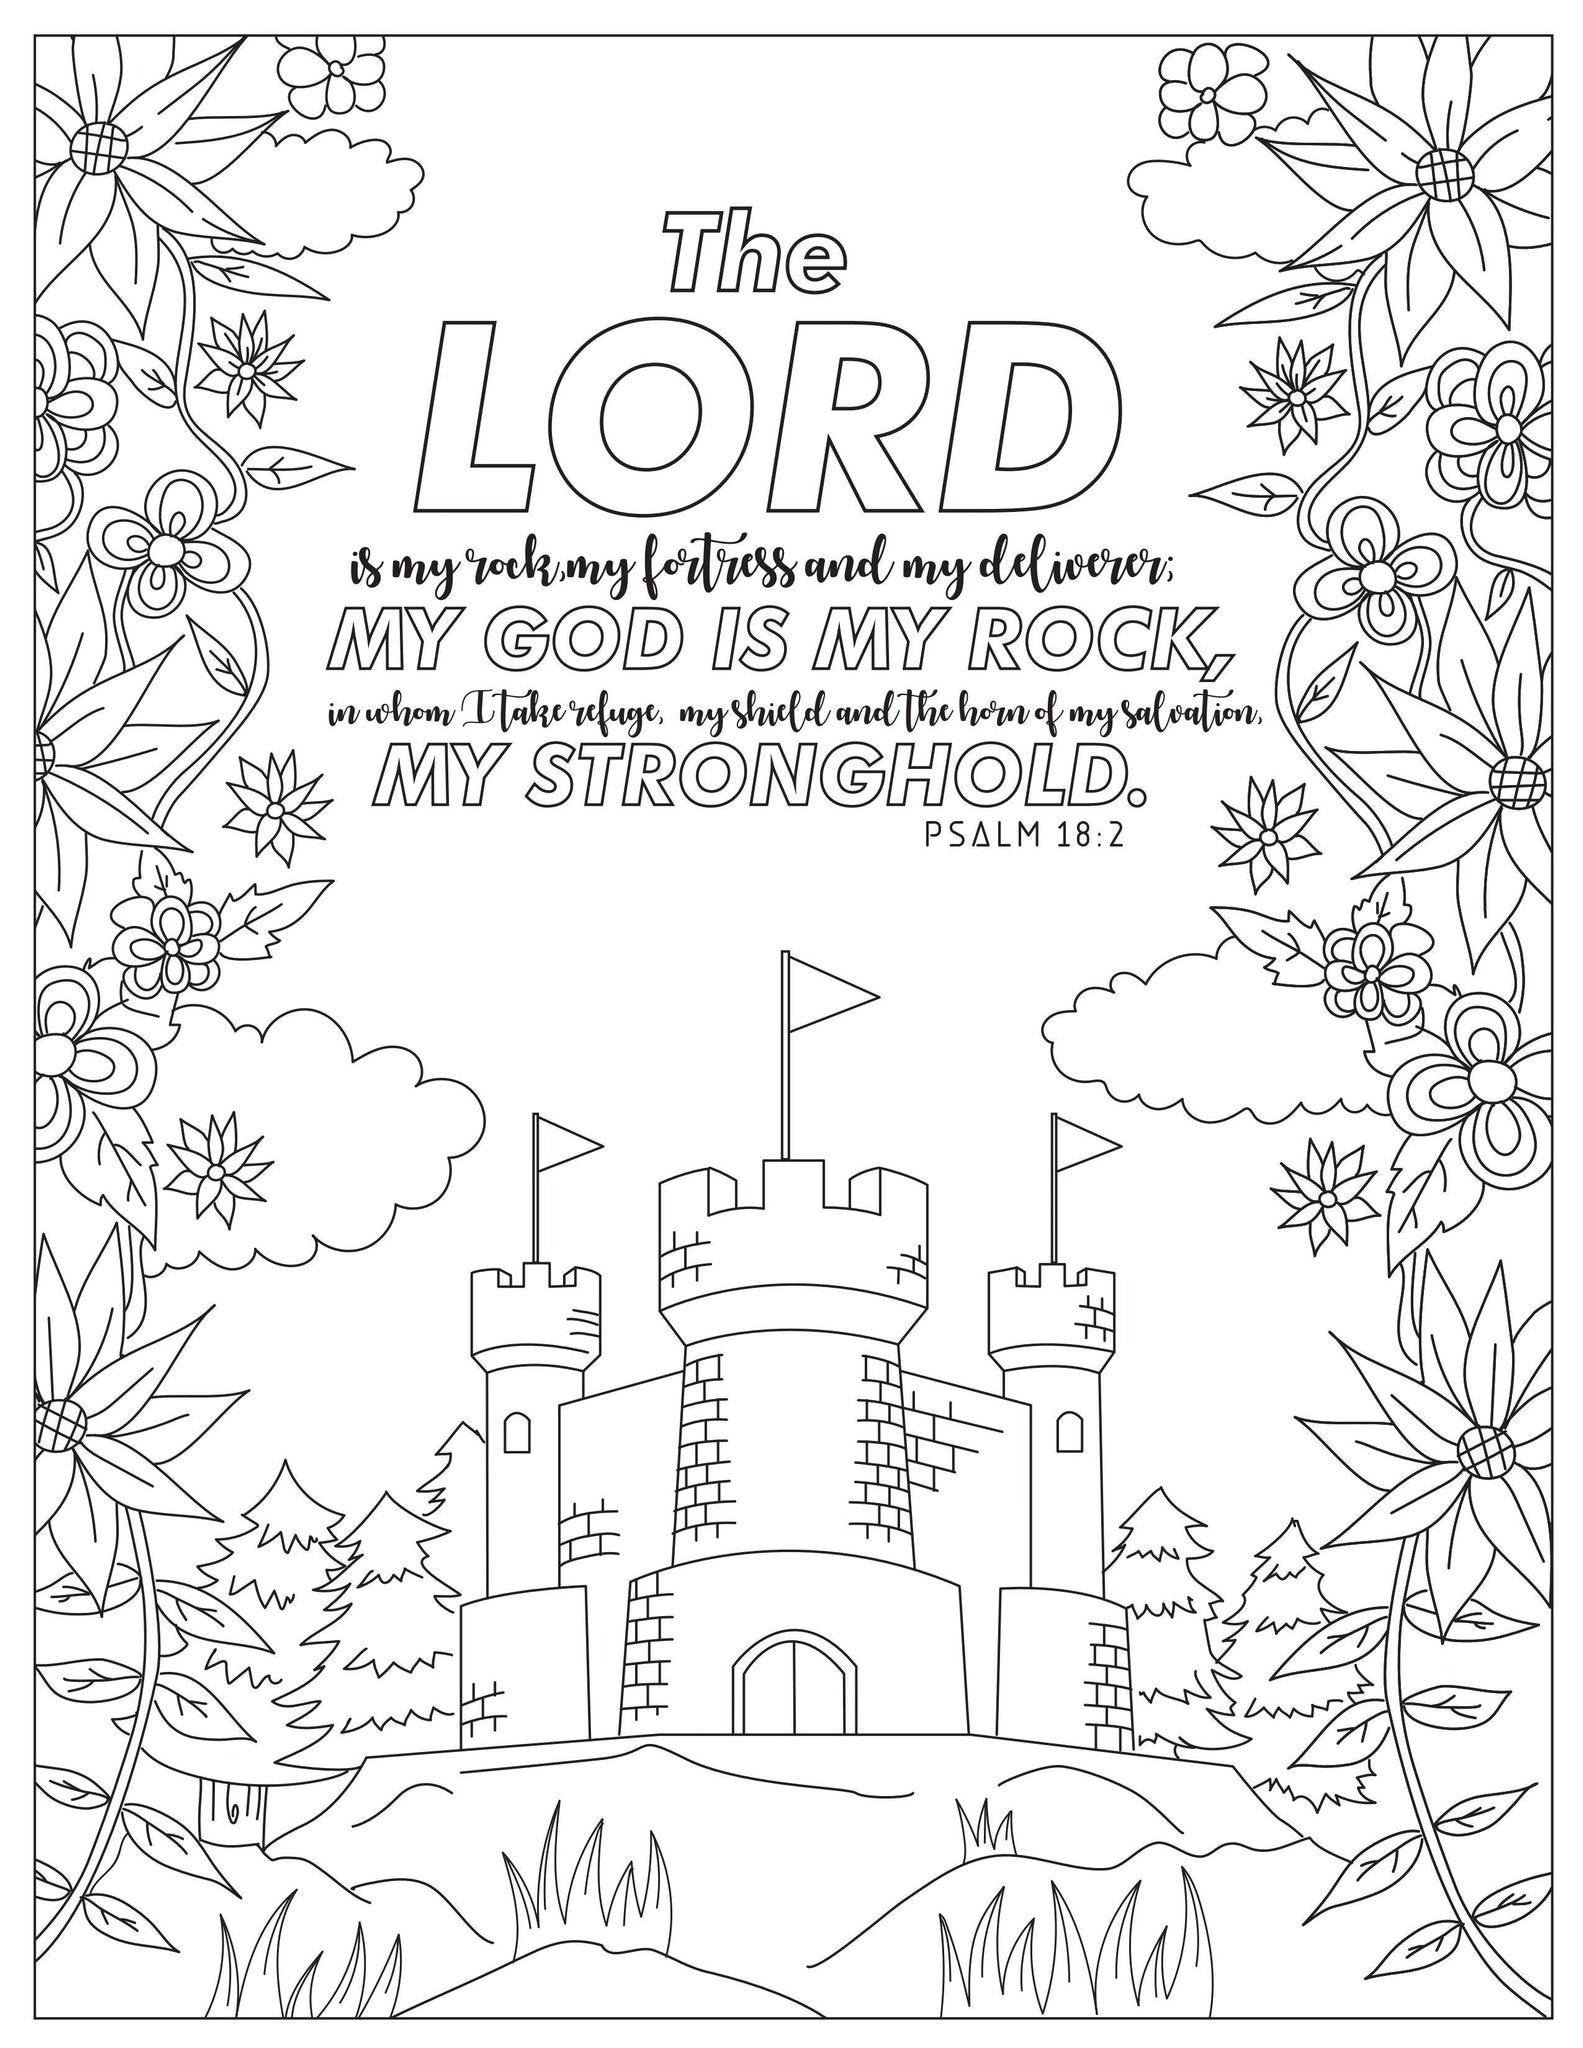 Download Book Of Psalms 37 Page Bible Coloring Book Download Only The Sunday School Store